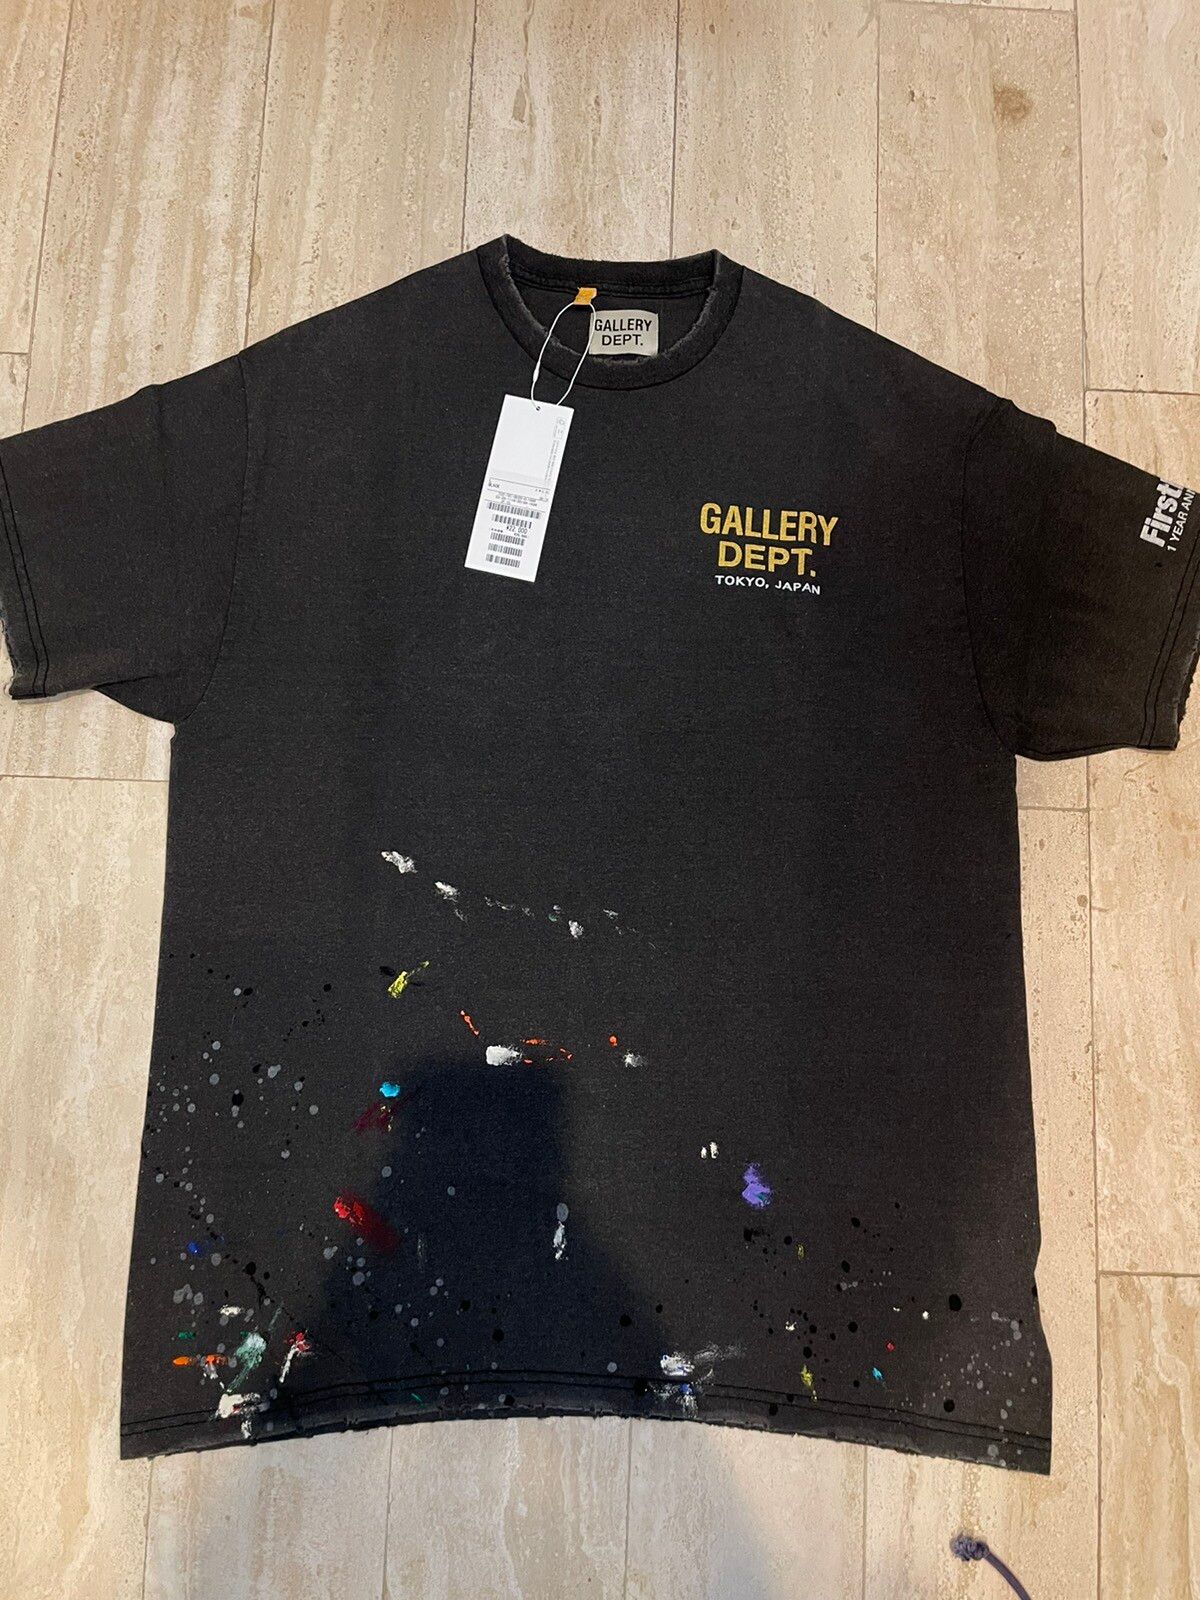 Gallery Dept. Gallery Dept Firsthand Anniversary Tokyo Painted Black ...